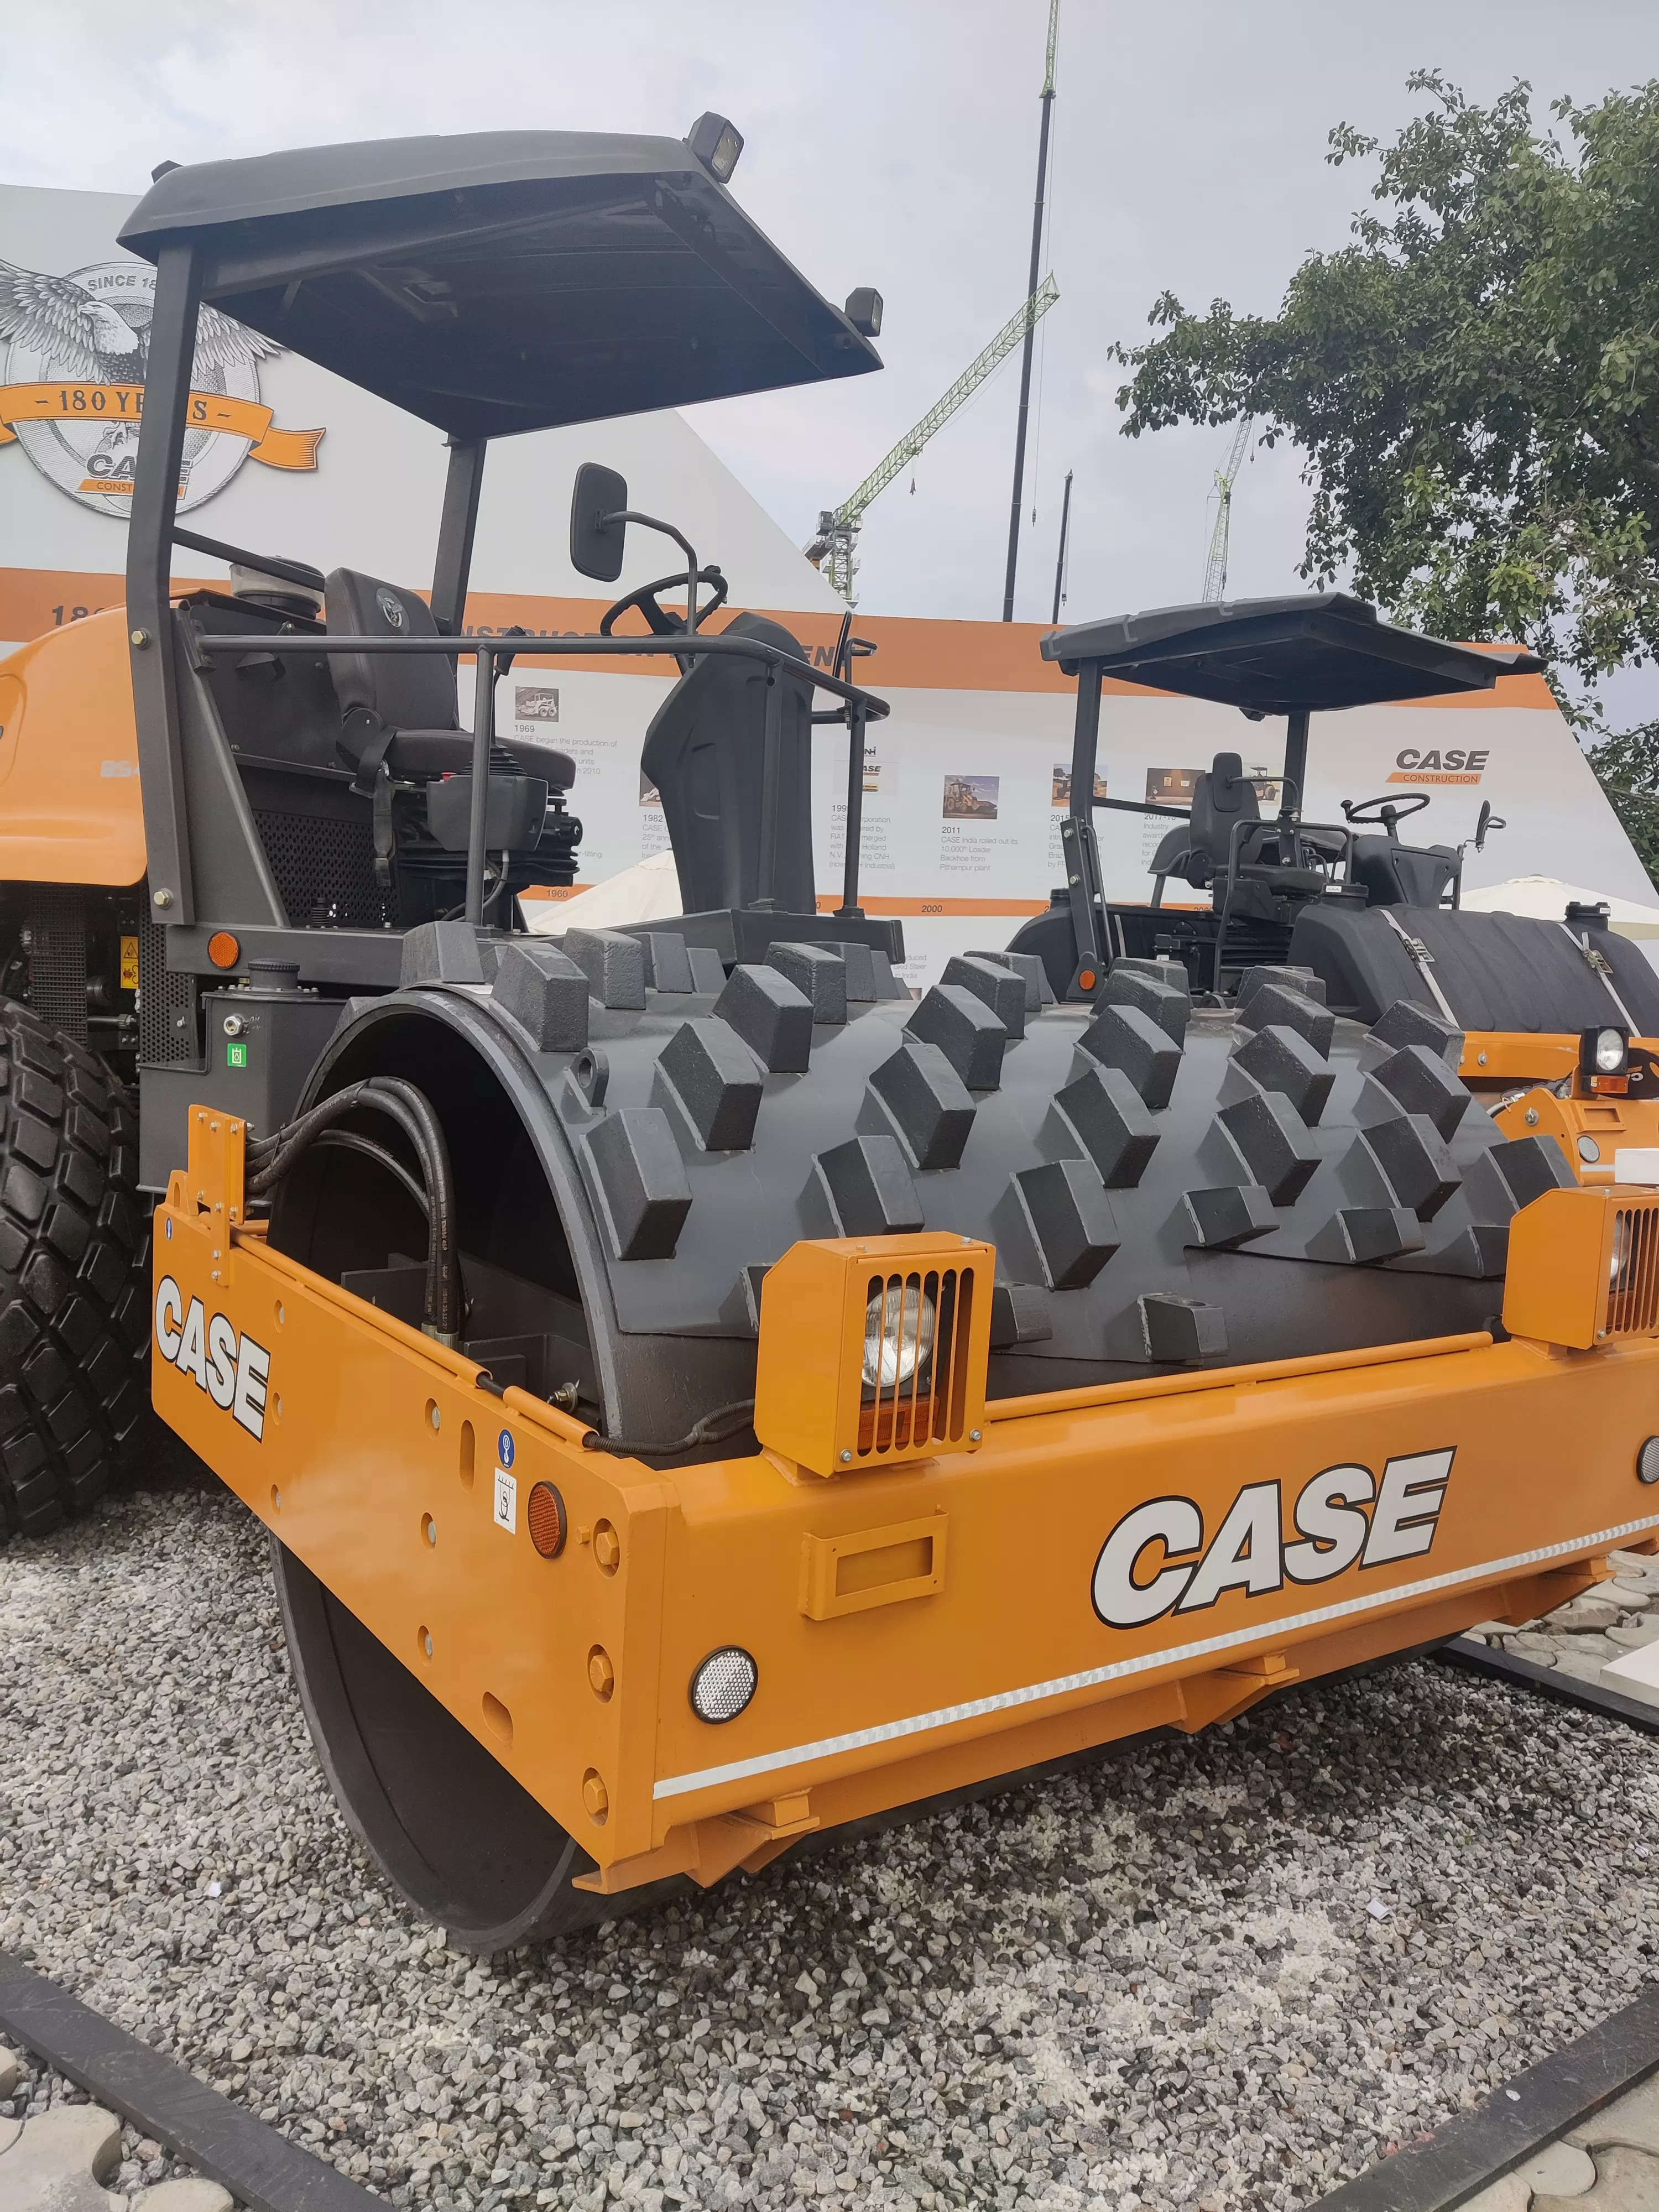  CASE launched machines starting with 770 NXe 49.5hp loader backhoe, together with the 770 EX Plus, 851 FX CP variant, 1107 EX Soil Vibratory Compactor, CX220C LC-HD Excavator, and 845C Motor Grader.